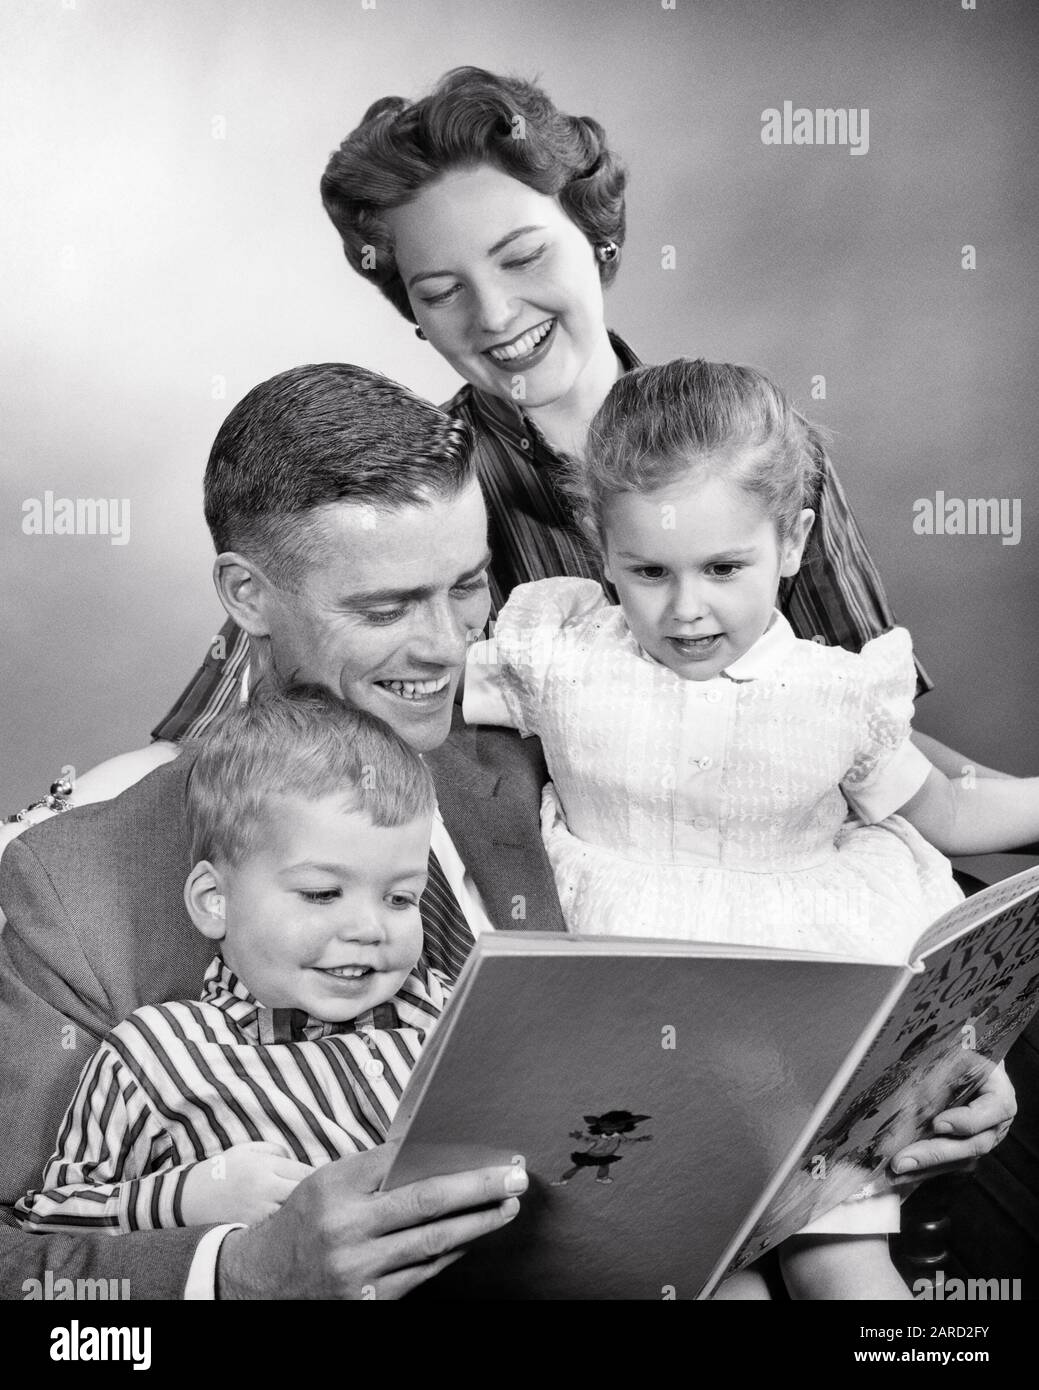 1950s FAMILY AT HOME WOMAN MAN GIRL BOY SMILING MOTHER WATCHING LOVING FATHER READ BOOK TO DAUGHTER AND SON - r506 HAR001 HARS INDOORS NOSTALGIC PAIR 4 SUBURBAN URBAN MOTHERS OLD TIME BUSY FUTURE NOSTALGIA BROTHER READ OLD FASHION SISTER 1 JUVENILE COMMUNICATION SECURITY TEAMWORK INFORMATION SONS PLEASED FAMILIES JOY LIFESTYLE FEMALES MARRIED BROTHERS SPOUSE HUSBANDS HEALTHINESS HOME LIFE COPY SPACE HALF-LENGTH LADIES DAUGHTERS PERSONS CARING MALES SERENITY SIBLINGS CONFIDENCE SISTERS FATHERS B&W PARTNER SUCCESS HAPPINESS WELLNESS HEAD AND SHOULDERS CHEERFUL DISCOVERY LEISURE STRENGTH AND DADS Stock Photo